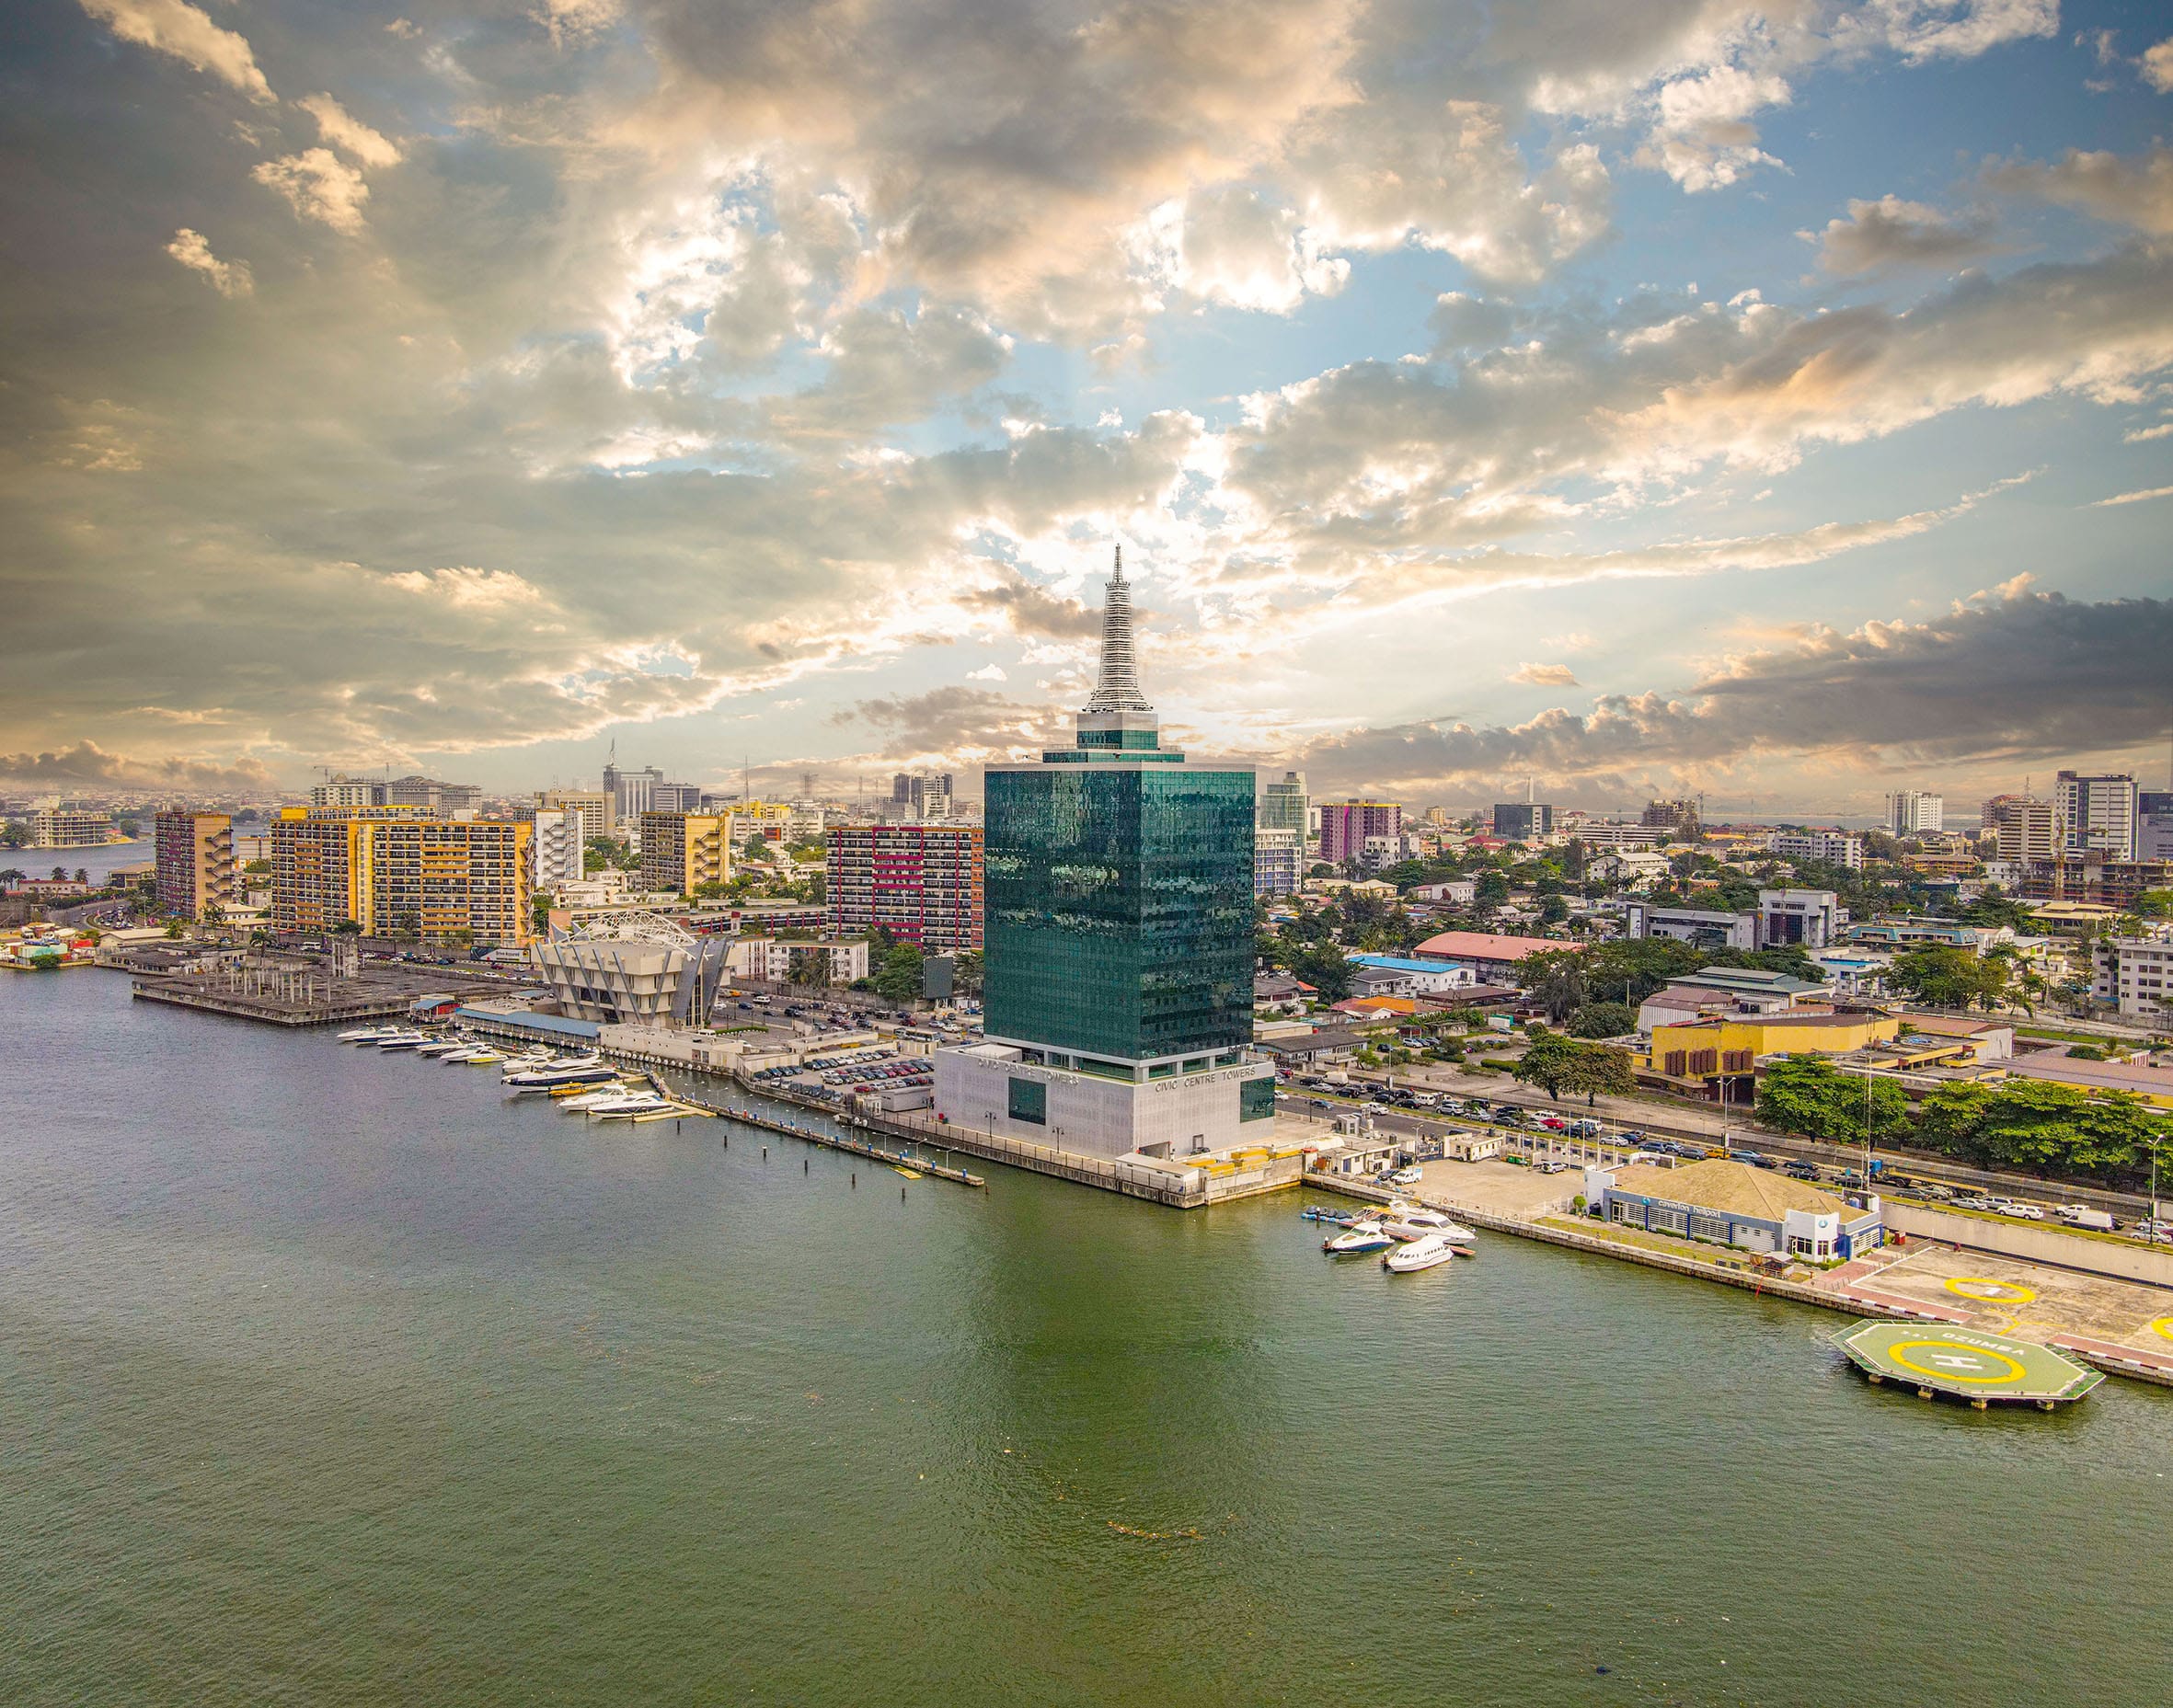 An aerial image of the shores of Victoria Island, Lagos